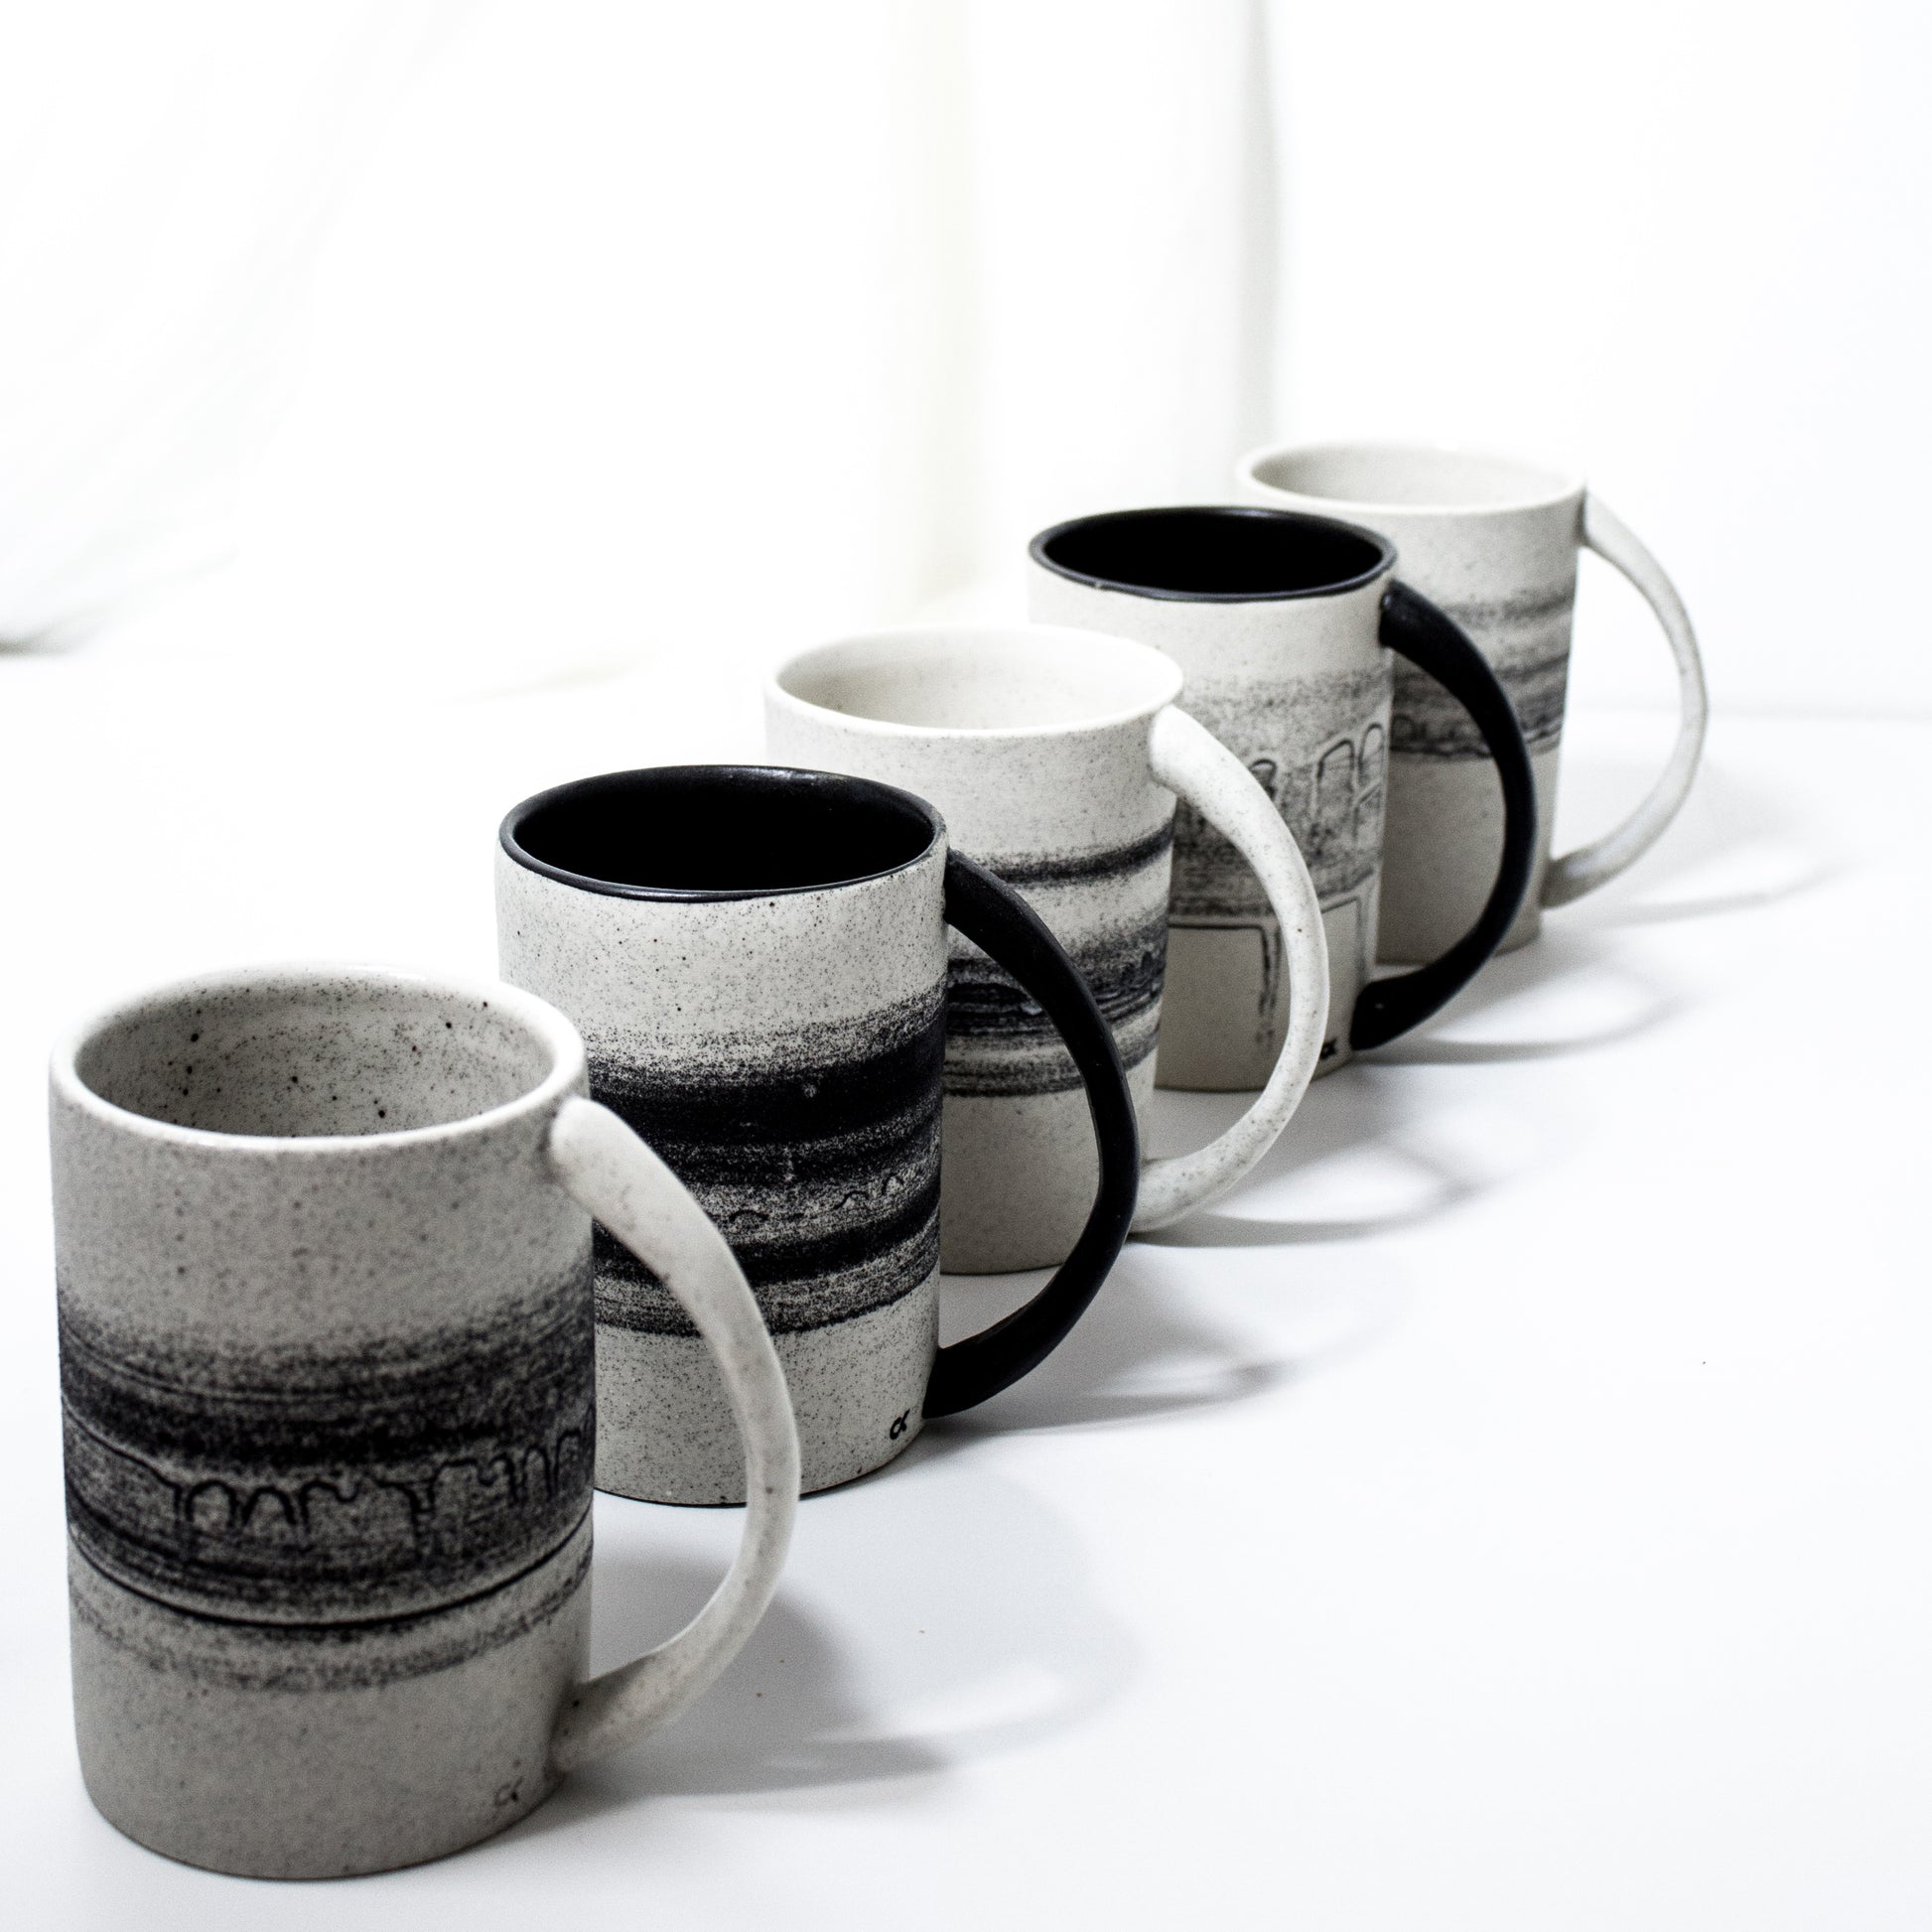 -Latte / Cappuccino Coffee Cup l -Black Matt on white porcelain clay -Straight Edge, slim body with lip to bottom, full arch handle -Modern simple shape + natural texture *Basalt Collection Drawing of mixture of dark minerals. The unique organic drawing is applied in a rotation motion of my wheel. 